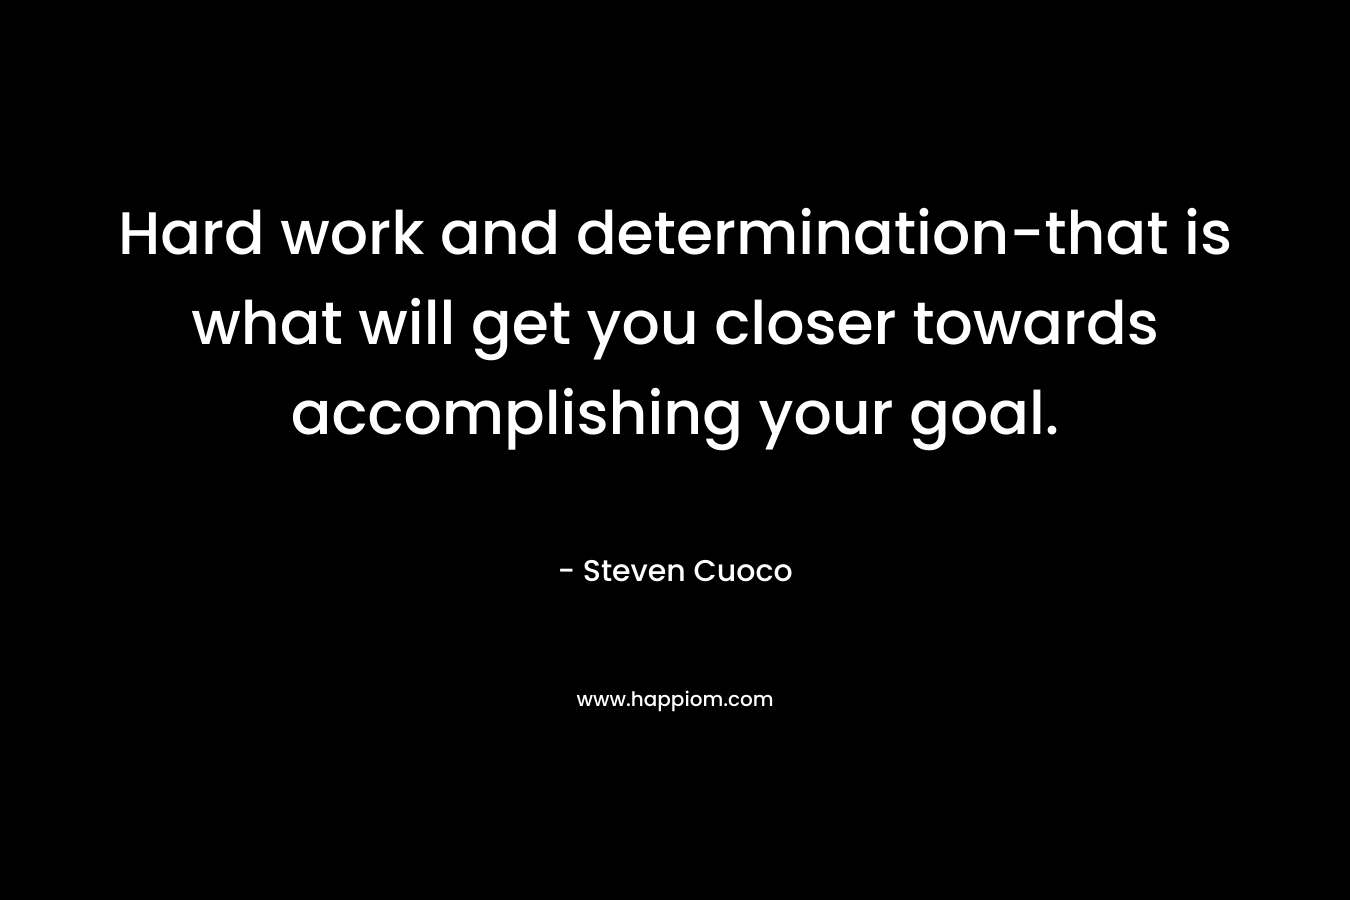 Hard work and determination-that is what will get you closer towards accomplishing your goal.